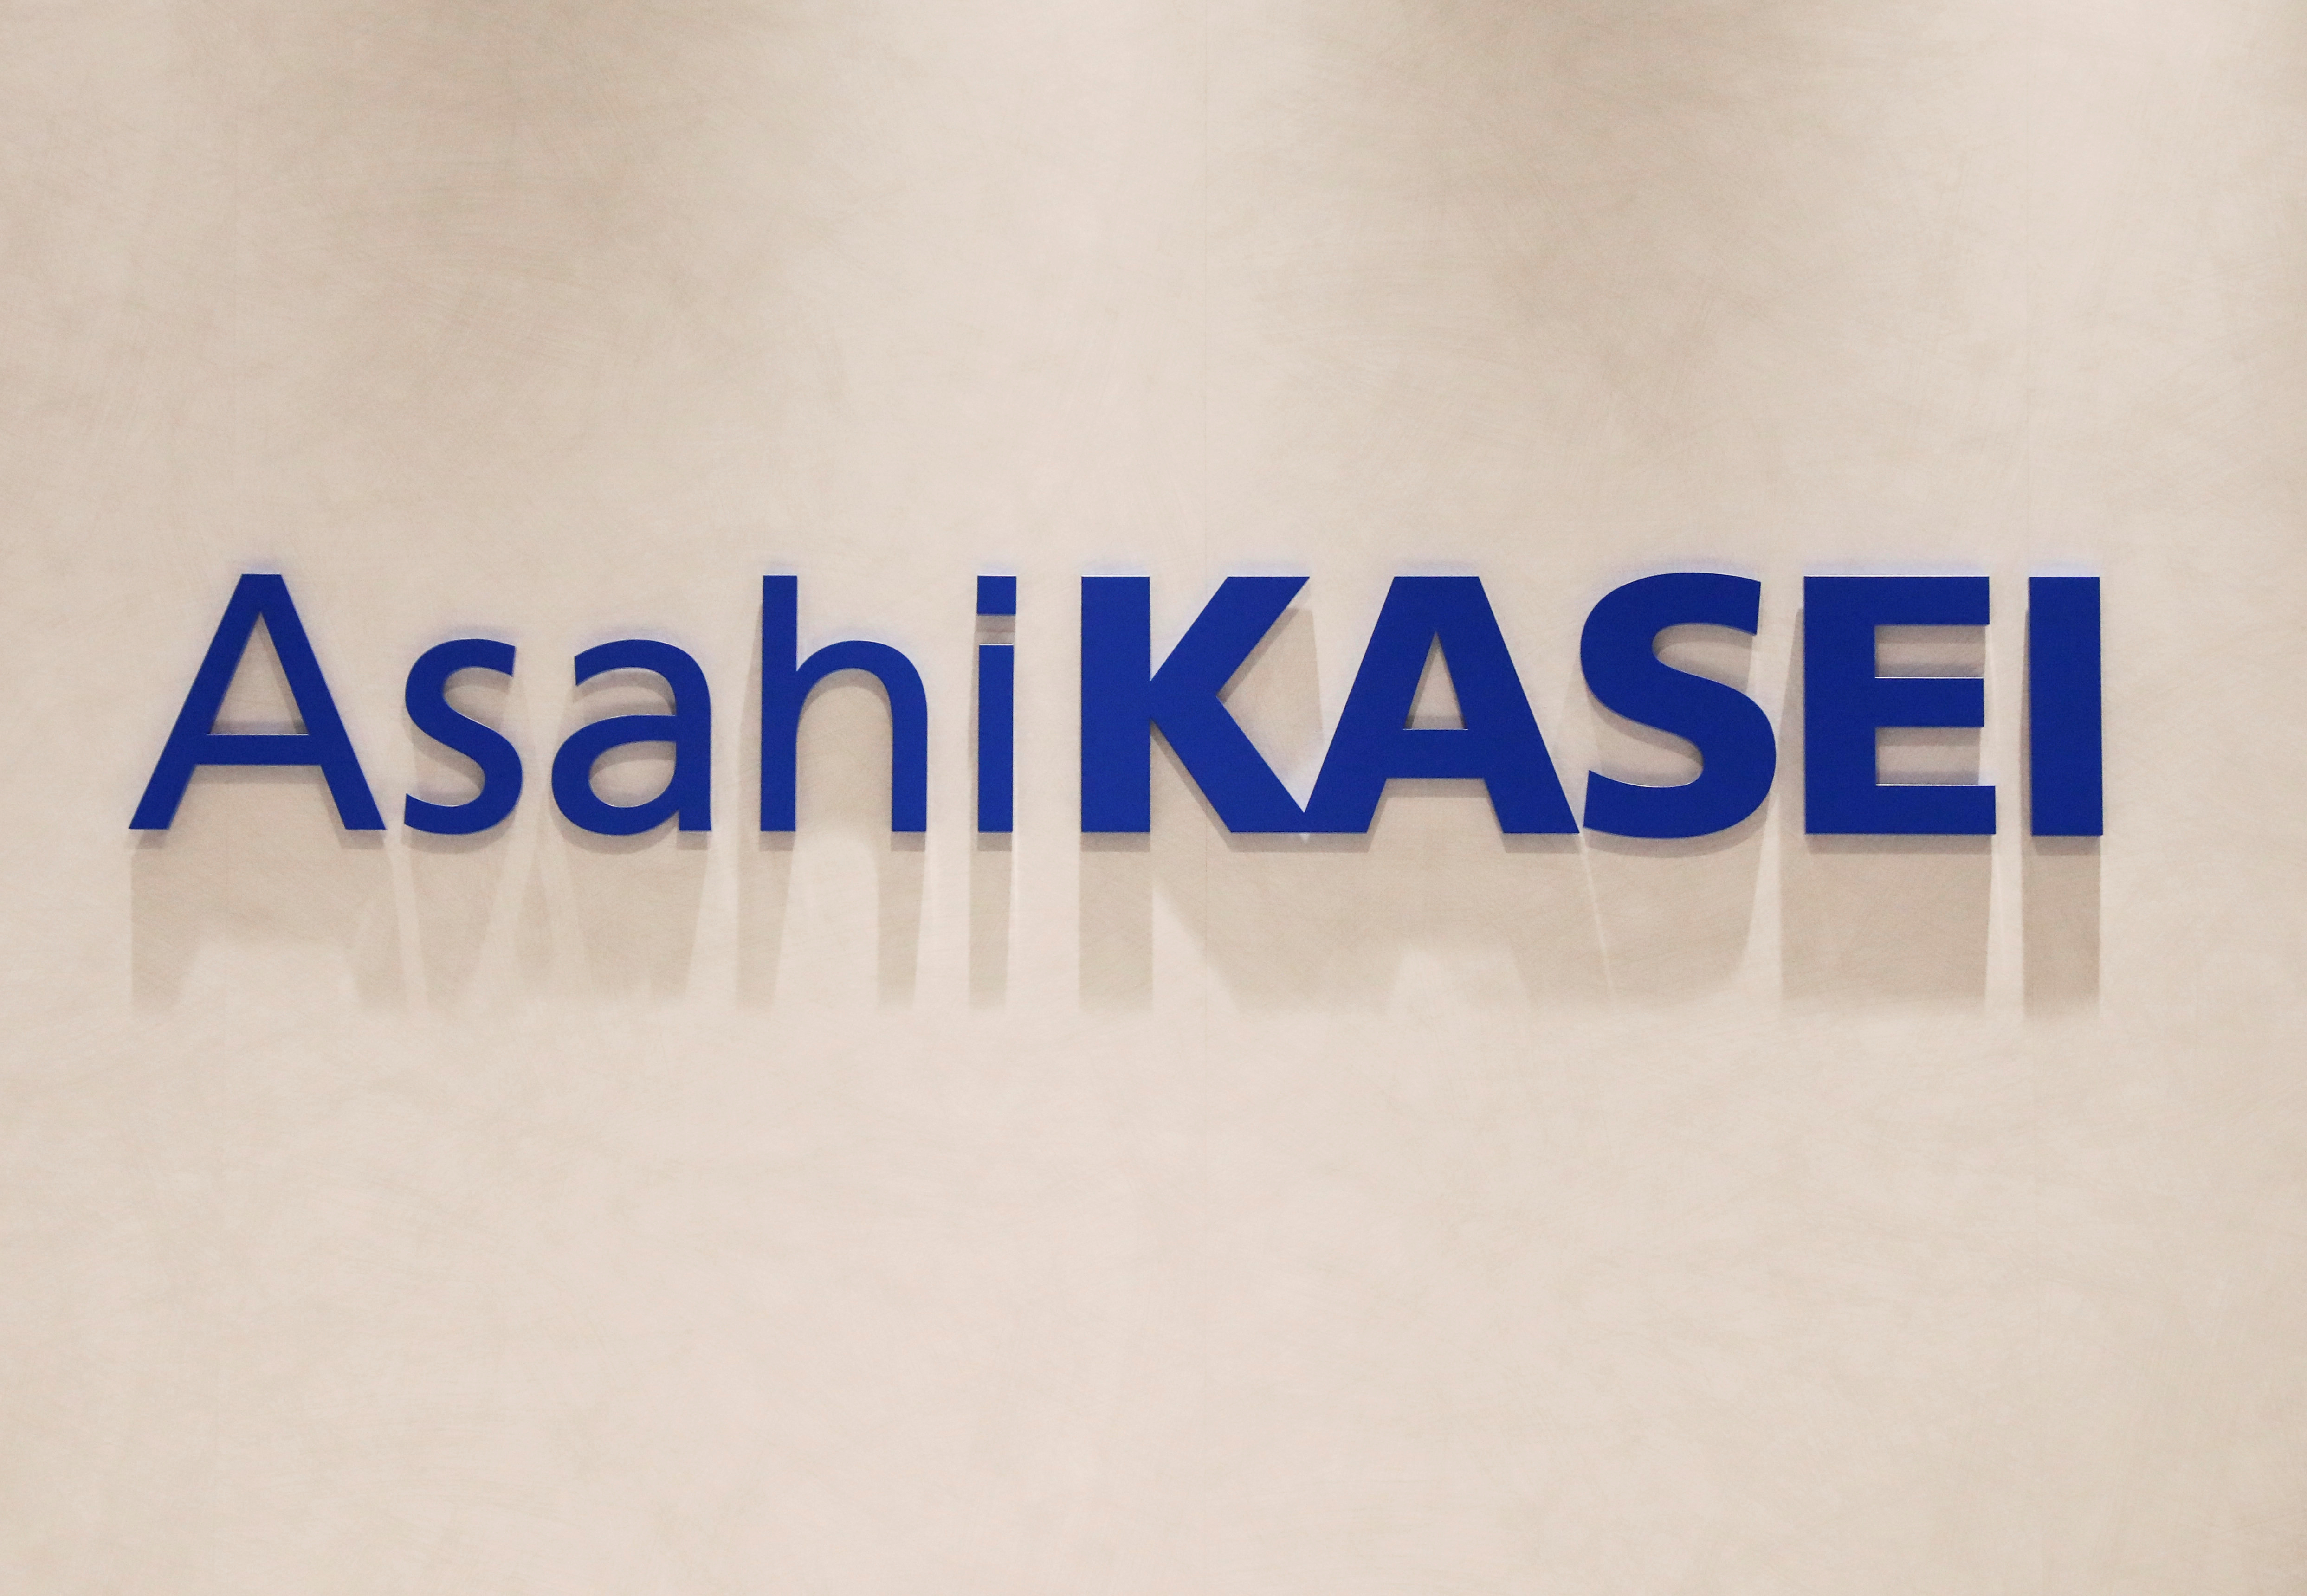 The logo of Asahi Kasei Corporation is displayed at an entrance of the company's Tokyo headquarters in Tokyo